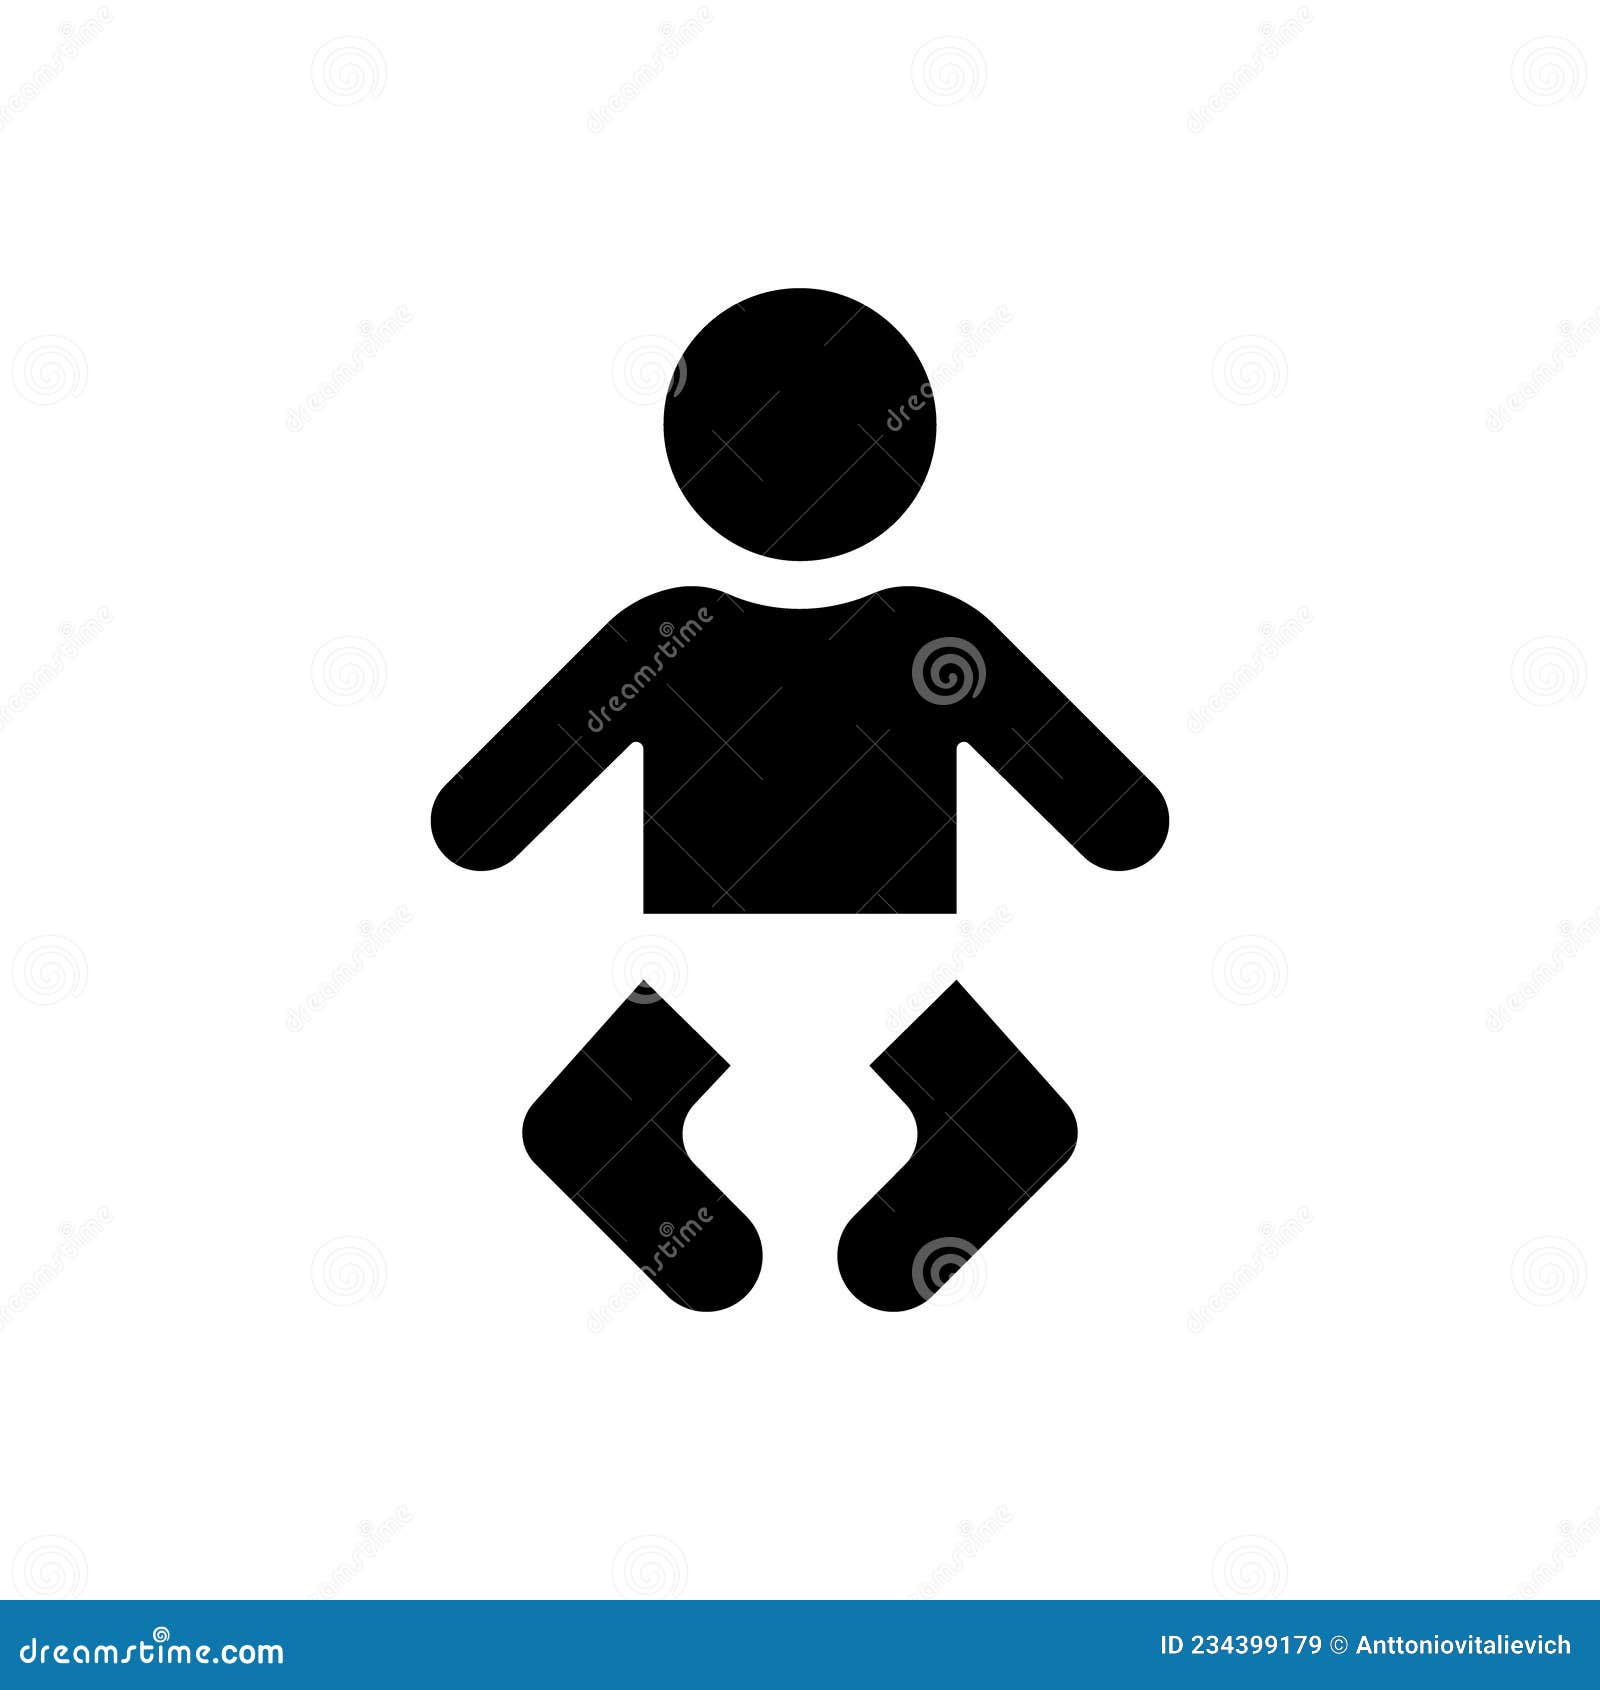 baby in diaper silhouette icon. sign of toilet room with station for changing nappy. childcare wc . nursery room